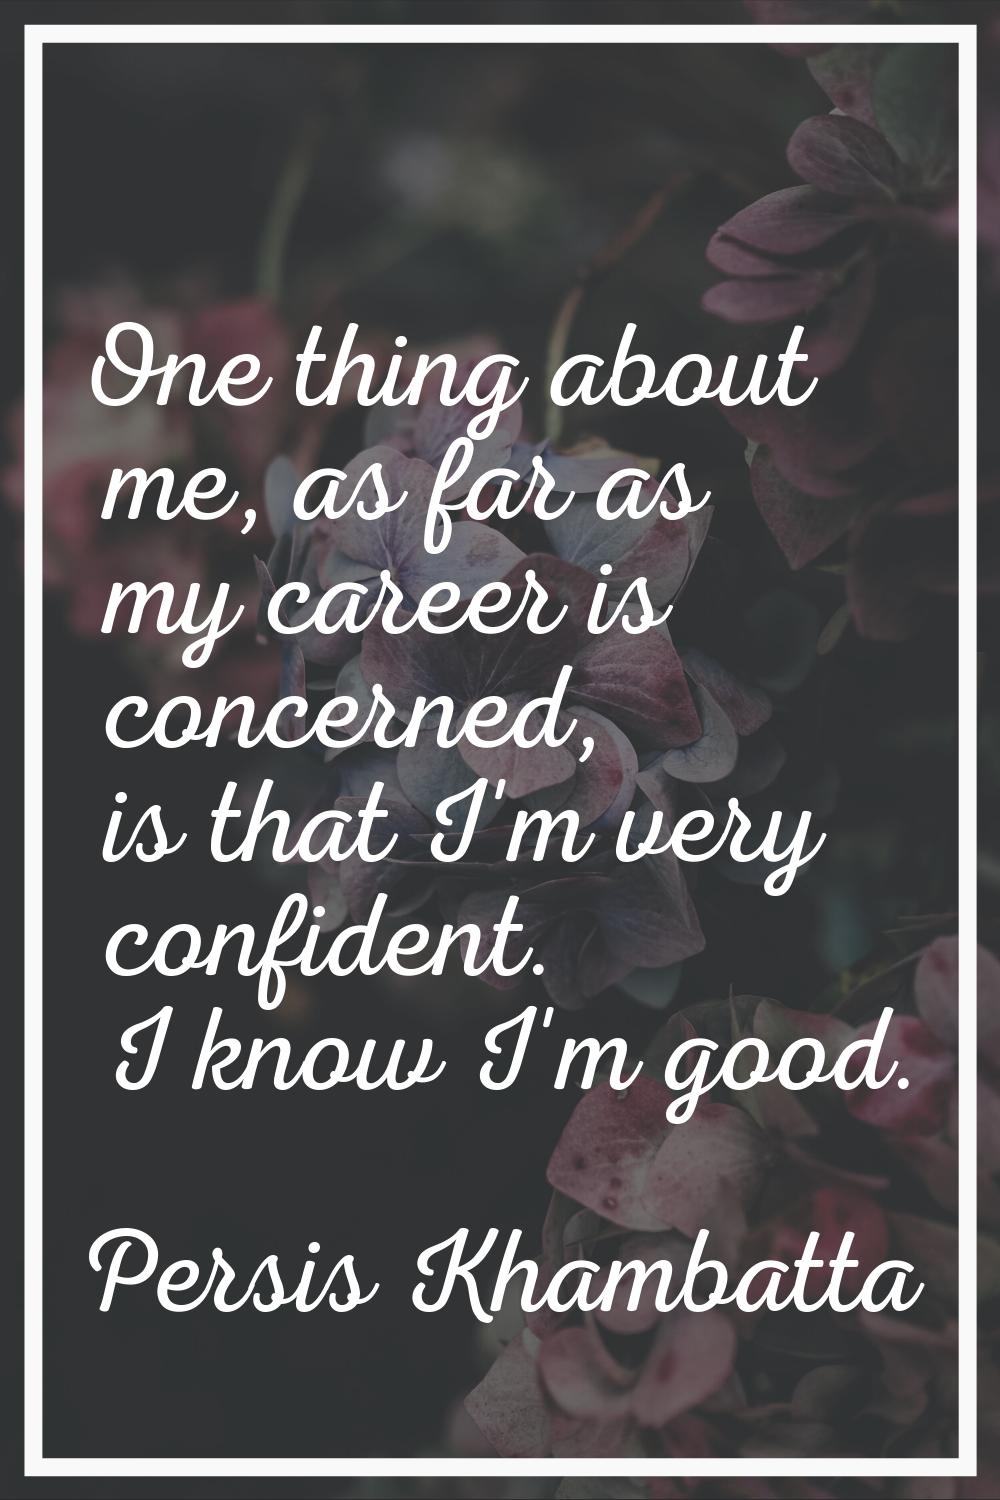 One thing about me, as far as my career is concerned, is that I'm very confident. I know I'm good.